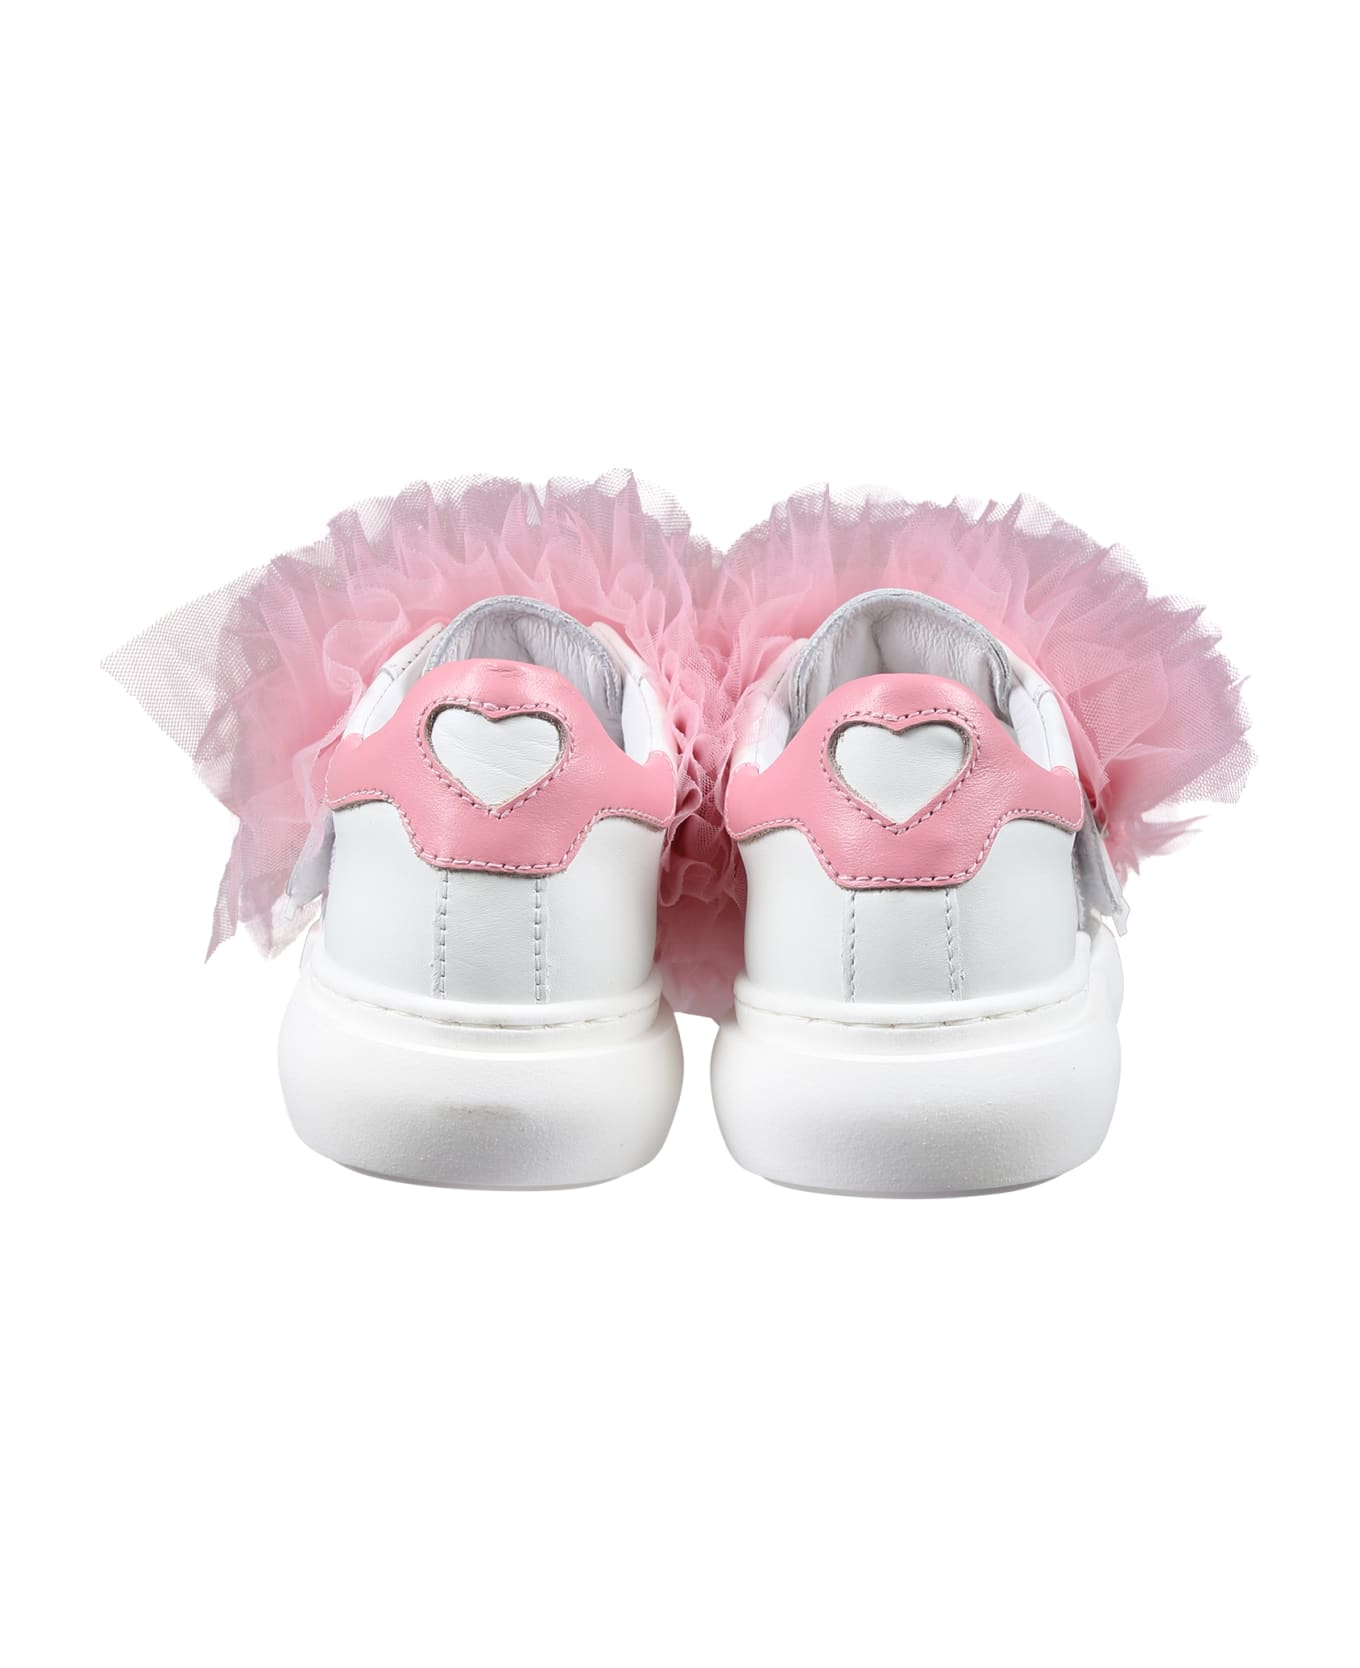 Monnalisa Pink Low Sneakers For Girl With Tulle - White シューズ